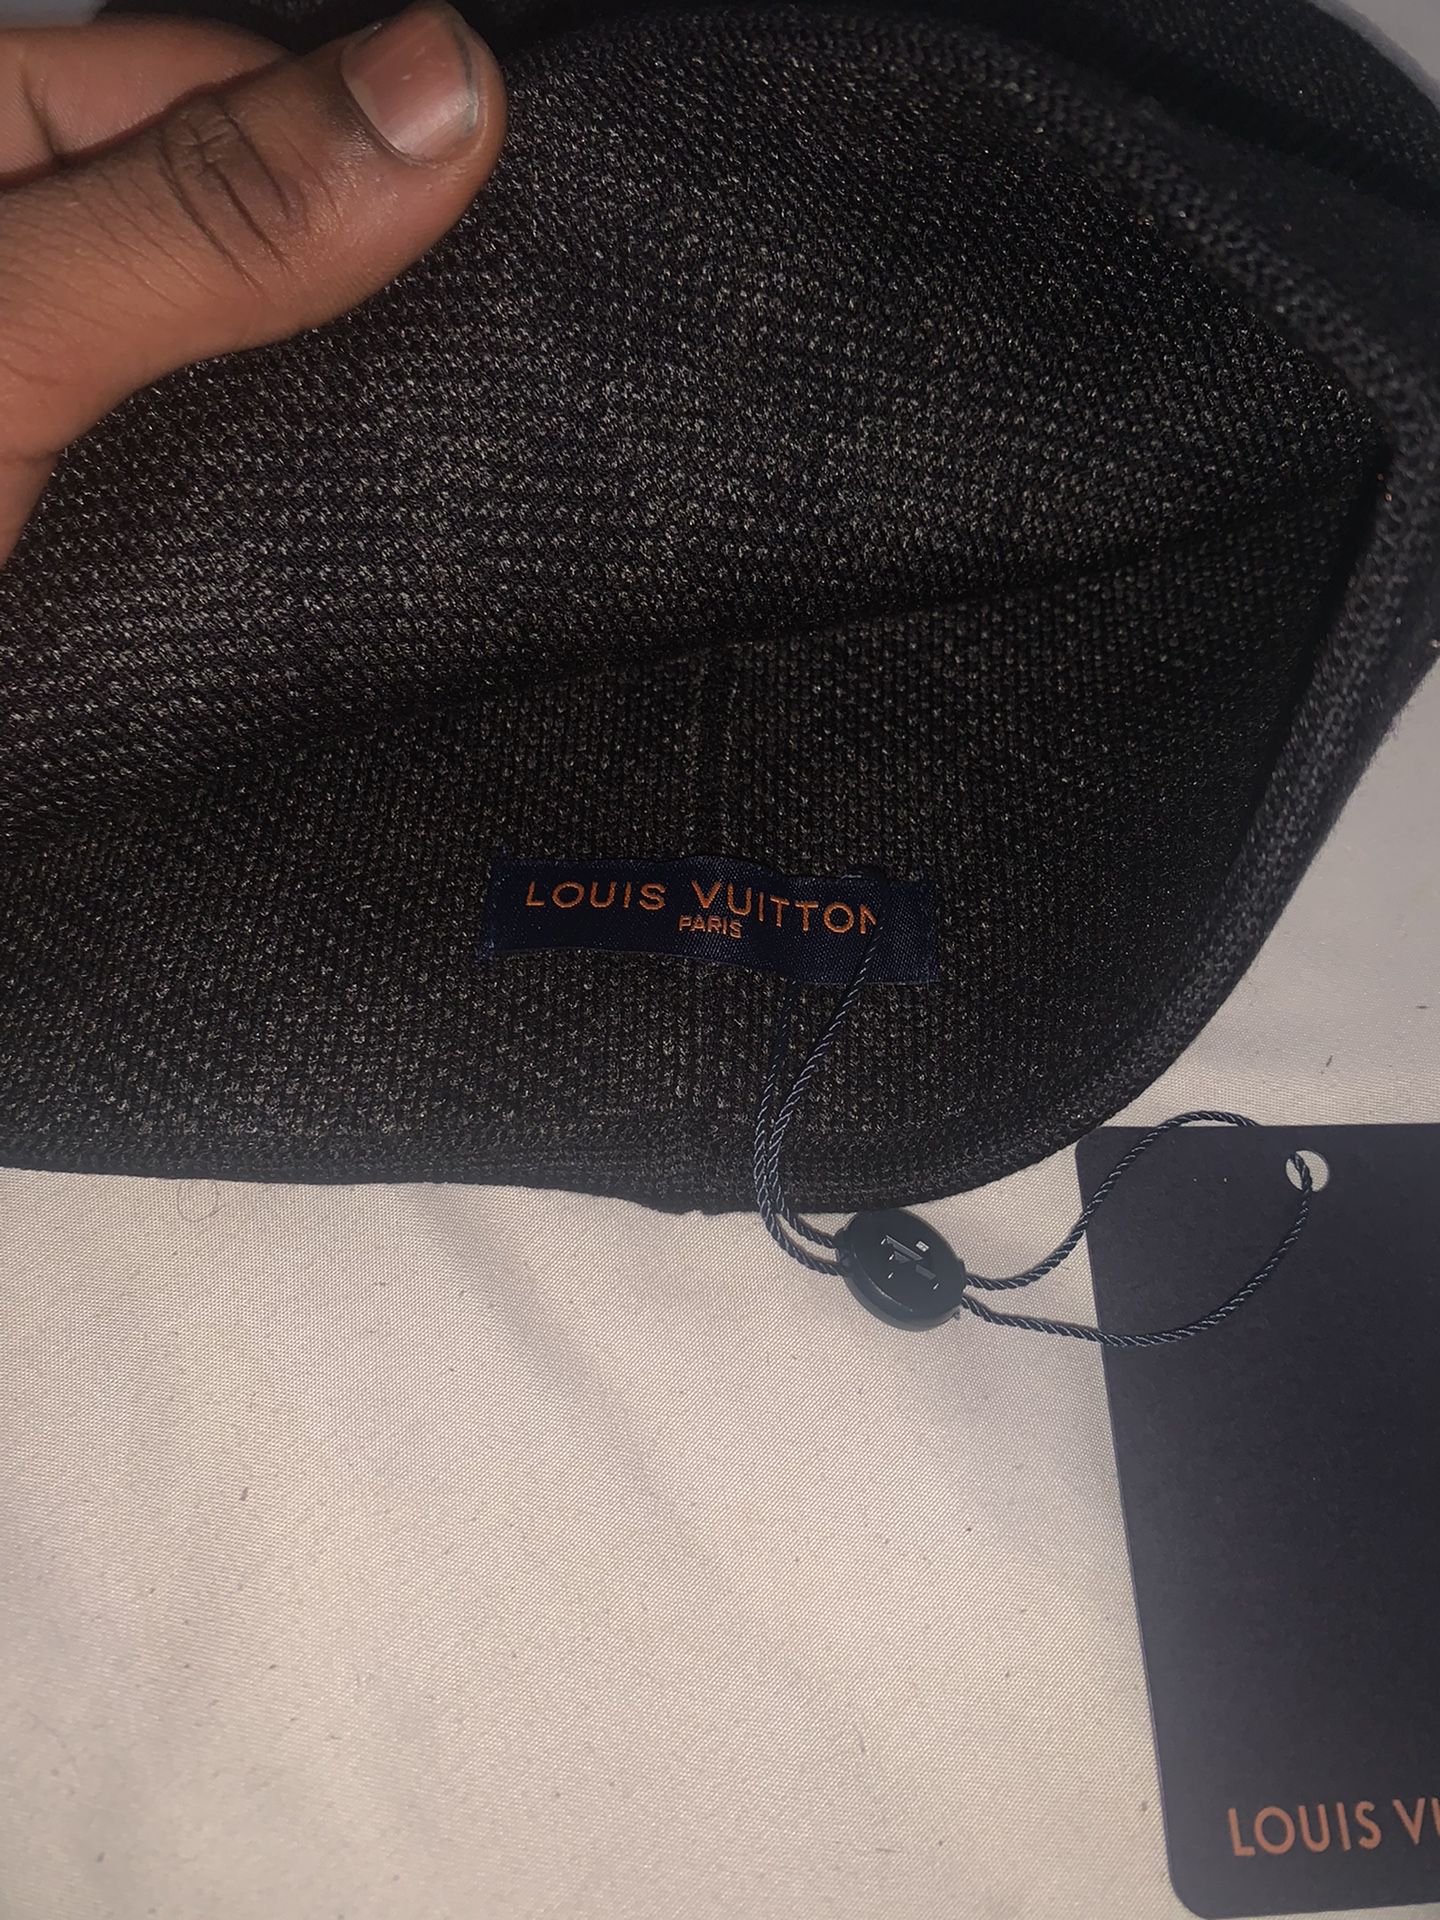 Louis Vuitton Beanie Hat for Sale in St. Louis, MO - OfferUp